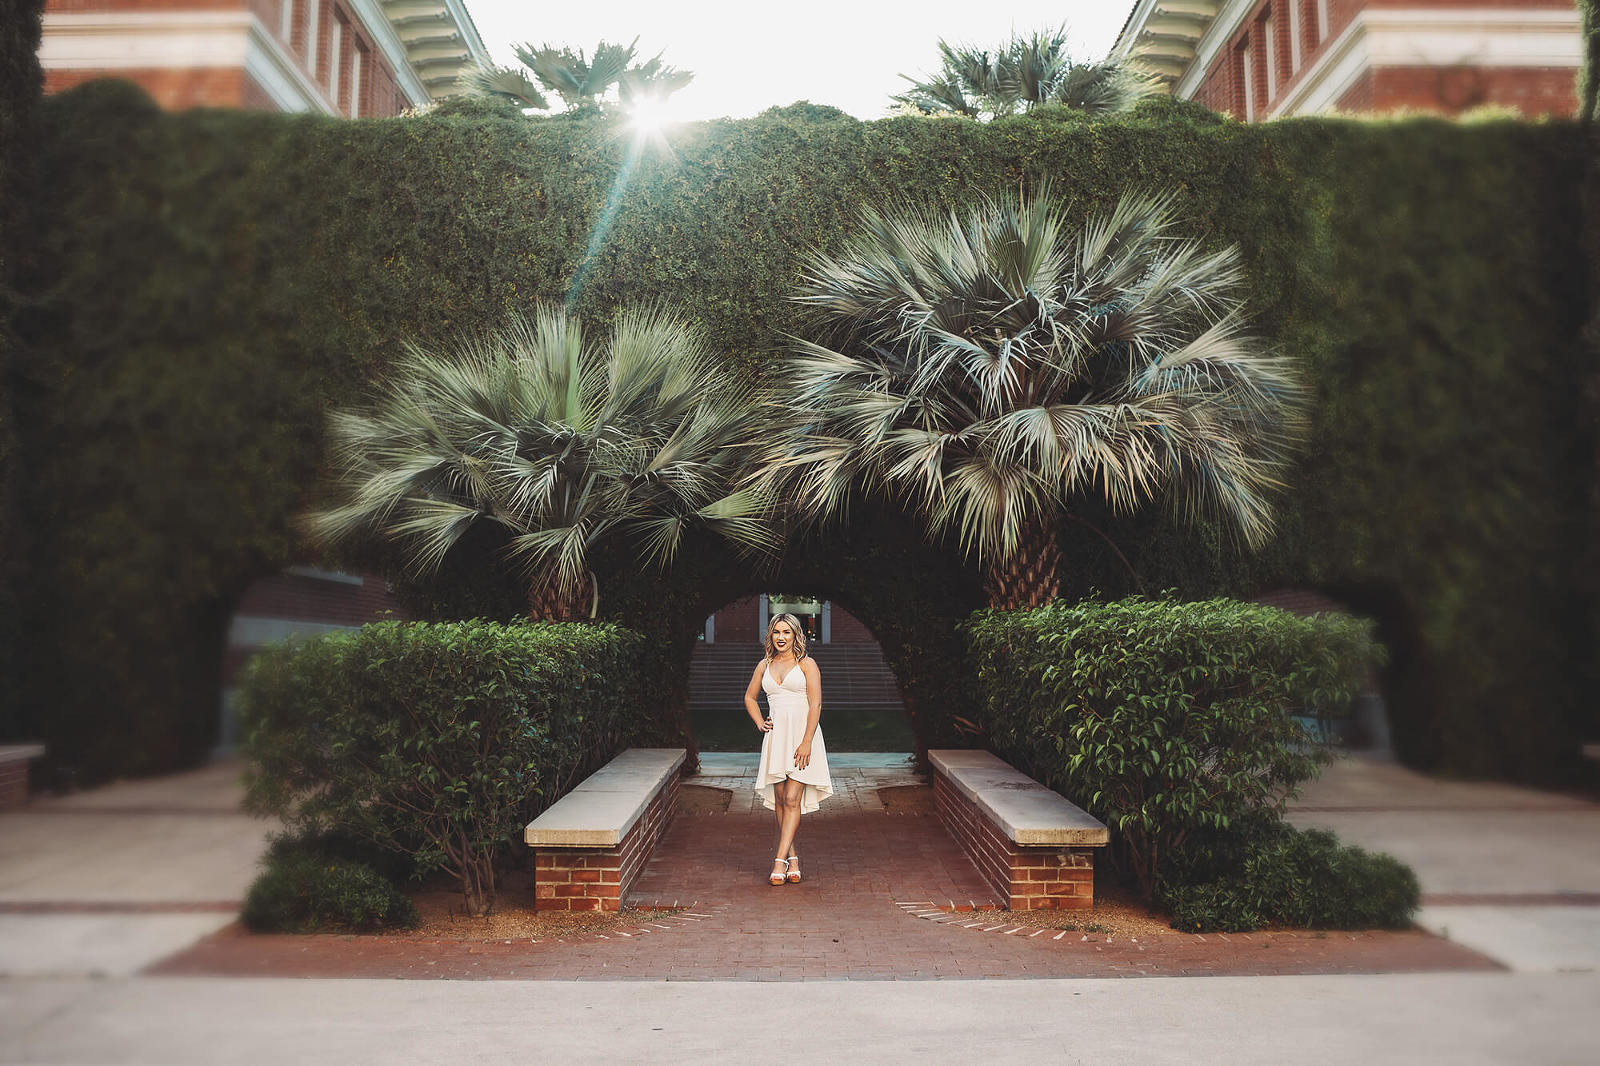 University of Arizona senior, Shelby, poses in front of a foliage covered campus building during her senior portrait session at U of A